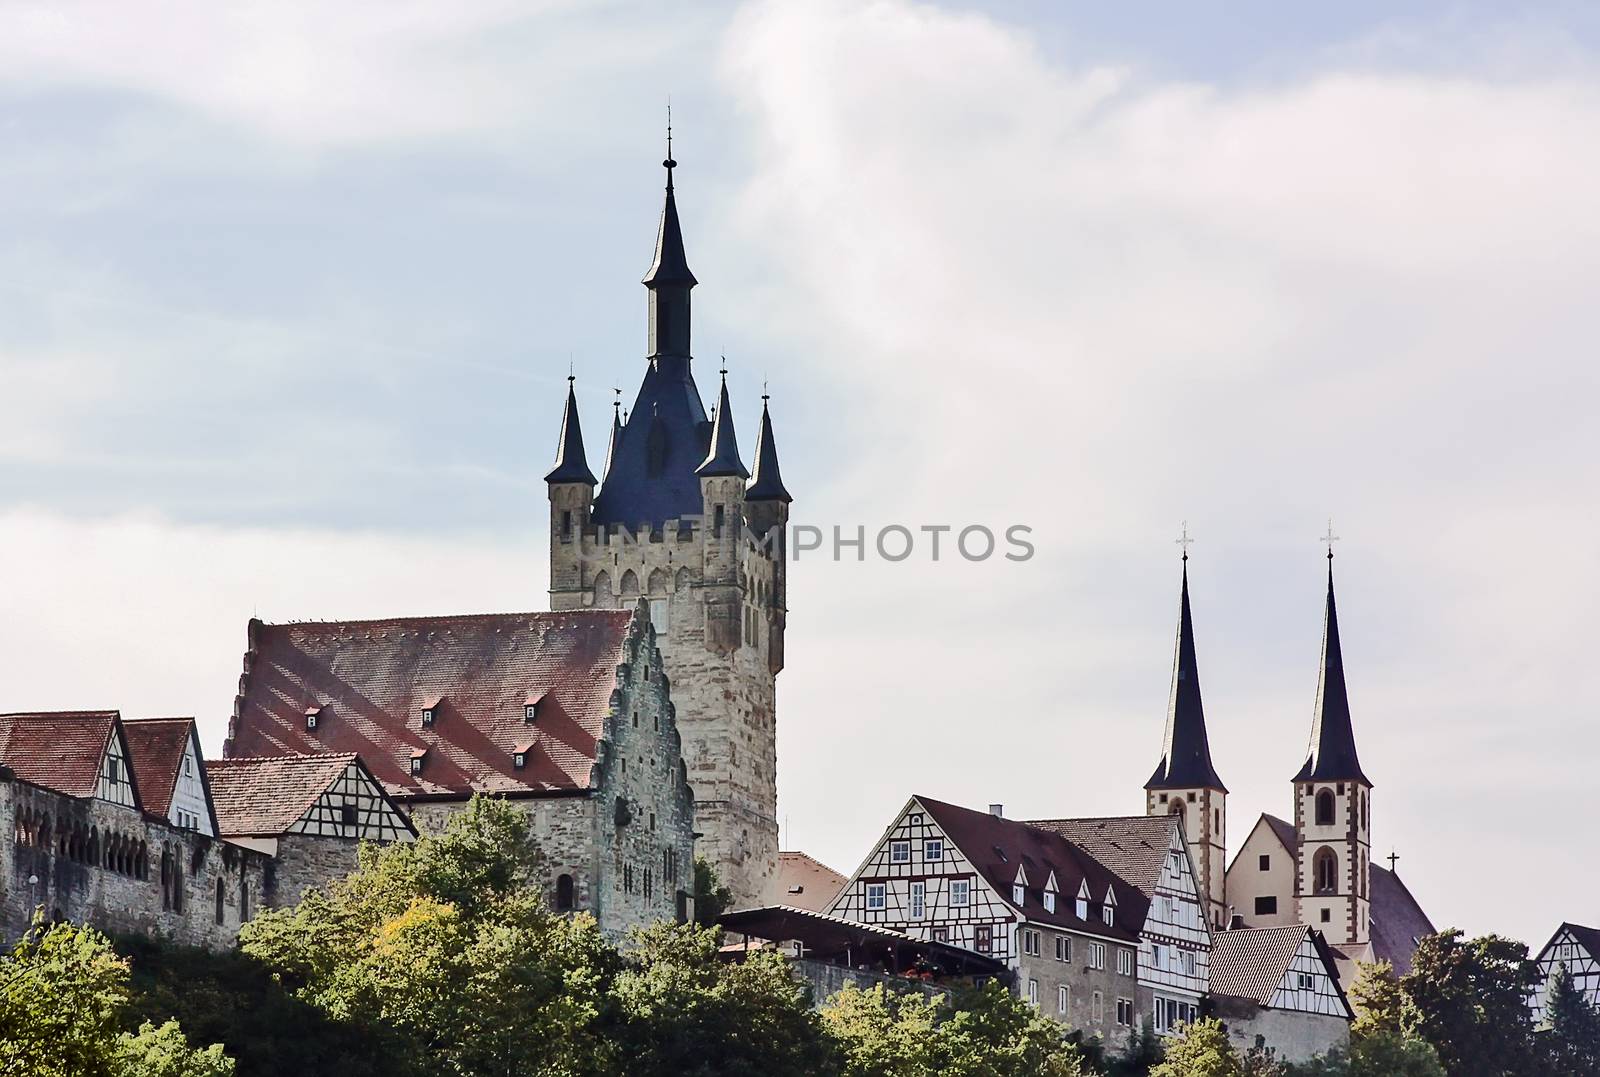 Bad Wimpfen is an historic spa town in the district of Heilbronn in the Baden-Wurttemberg region of southern Germany. Kind on a city from the river Nekar